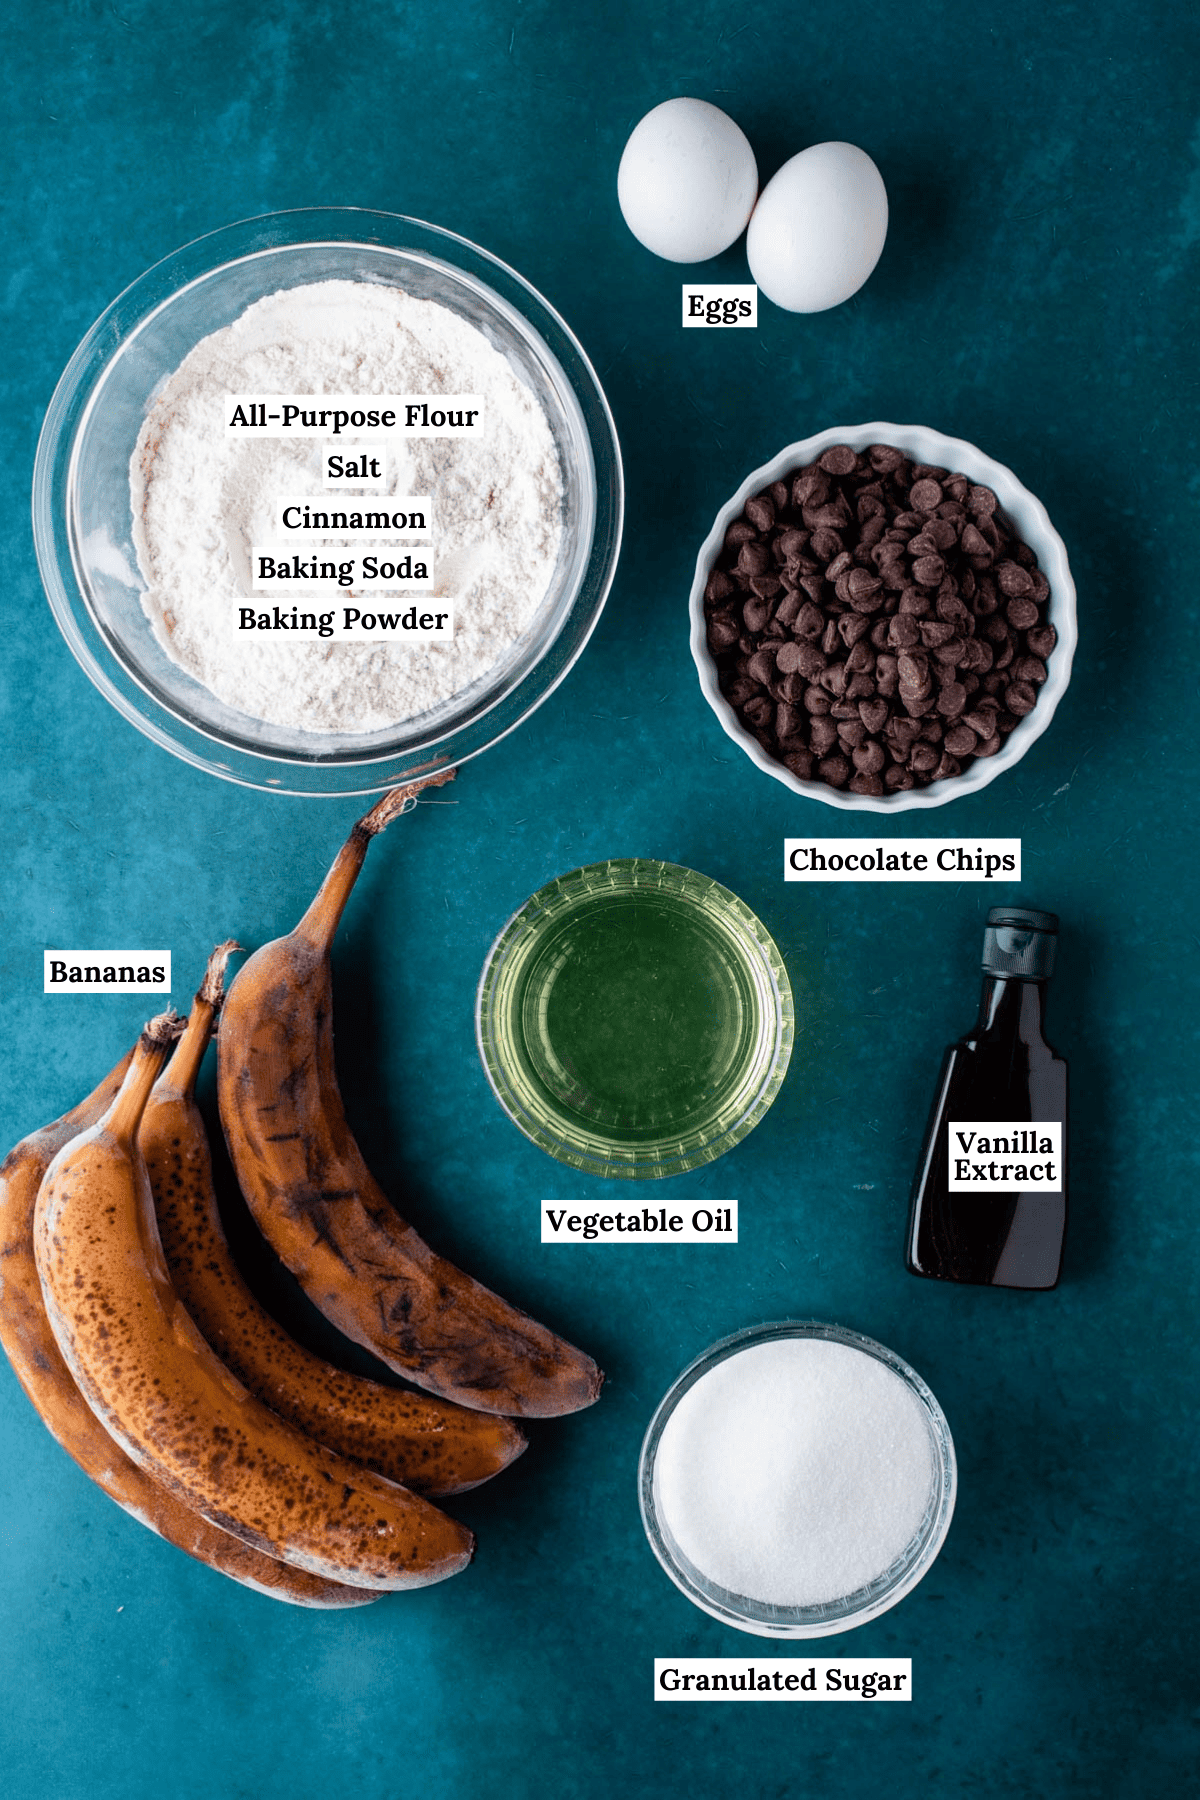 ingredients for chocolate chip banana bread including flour, salt, cinnamon, baking powder, baking soda, eggs, chocolate chips, vegetable oil, vanilla extract, overripe bananas, and granulated sugar